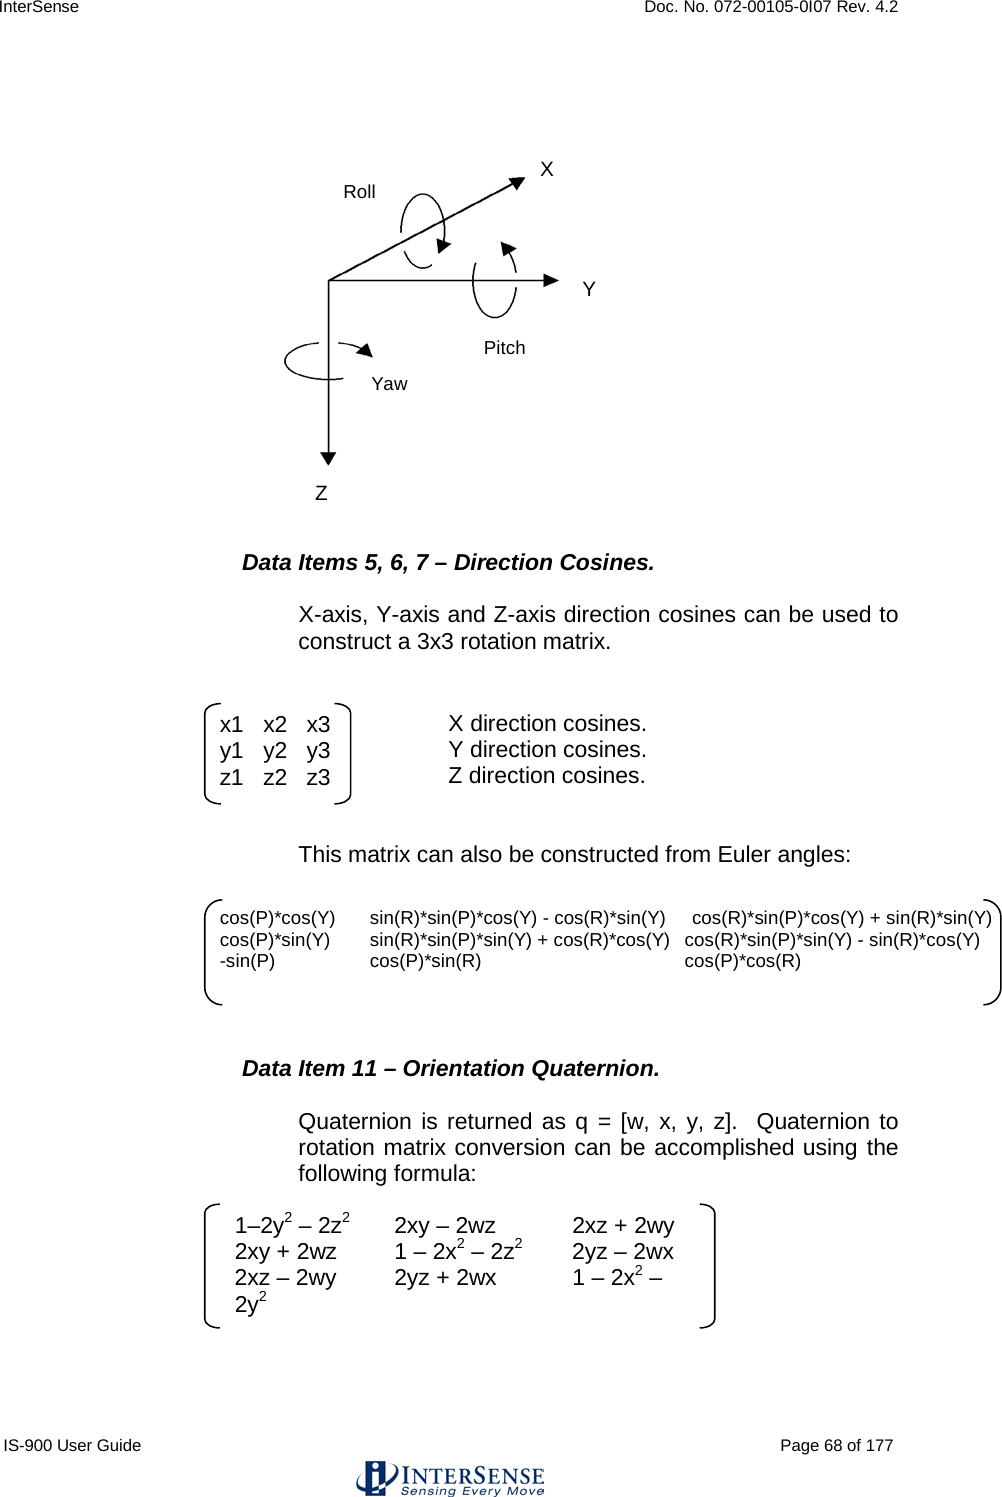 InterSense    Doc. No. 072-00105-0I07 Rev. 4.2 IS-900 User Guide                                                                                                                                          Page 68 of 177                   Data Items 5, 6, 7 – Direction Cosines.  X-axis, Y-axis and Z-axis direction cosines can be used to construct a 3x3 rotation matrix.        X direction cosines.       Y direction cosines.       Z direction cosines.   This matrix can also be constructed from Euler angles:       Data Item 11 – Orientation Quaternion.  Quaternion is returned as q = [w, x, y, z].  Quaternion to rotation matrix conversion can be accomplished using the following formula:        x1   x2   x3 y1   y2   y3 z1   z2   z3 1–2y2 – 2z2 2xy – 2wz 2xz + 2wy  2xy + 2wz 1 – 2x2 – 2z2 2yz – 2wx  2xz – 2wy 2yz + 2wx 1 – 2x2 – 2y2 cos(P)*cos(Y)  sin(R)*sin(P)*cos(Y) - cos(R)*sin(Y)     cos(R)*sin(P)*cos(Y) + sin(R)*sin(Y)   cos(P)*sin(Y)  sin(R)*sin(P)*sin(Y) + cos(R)*cos(Y)   cos(R)*sin(P)*sin(Y) - sin(R)*cos(Y)   -sin(P)  cos(P)*sin(R)   cos(P)*cos(R) Yaw Roll Pitch X Y Z 